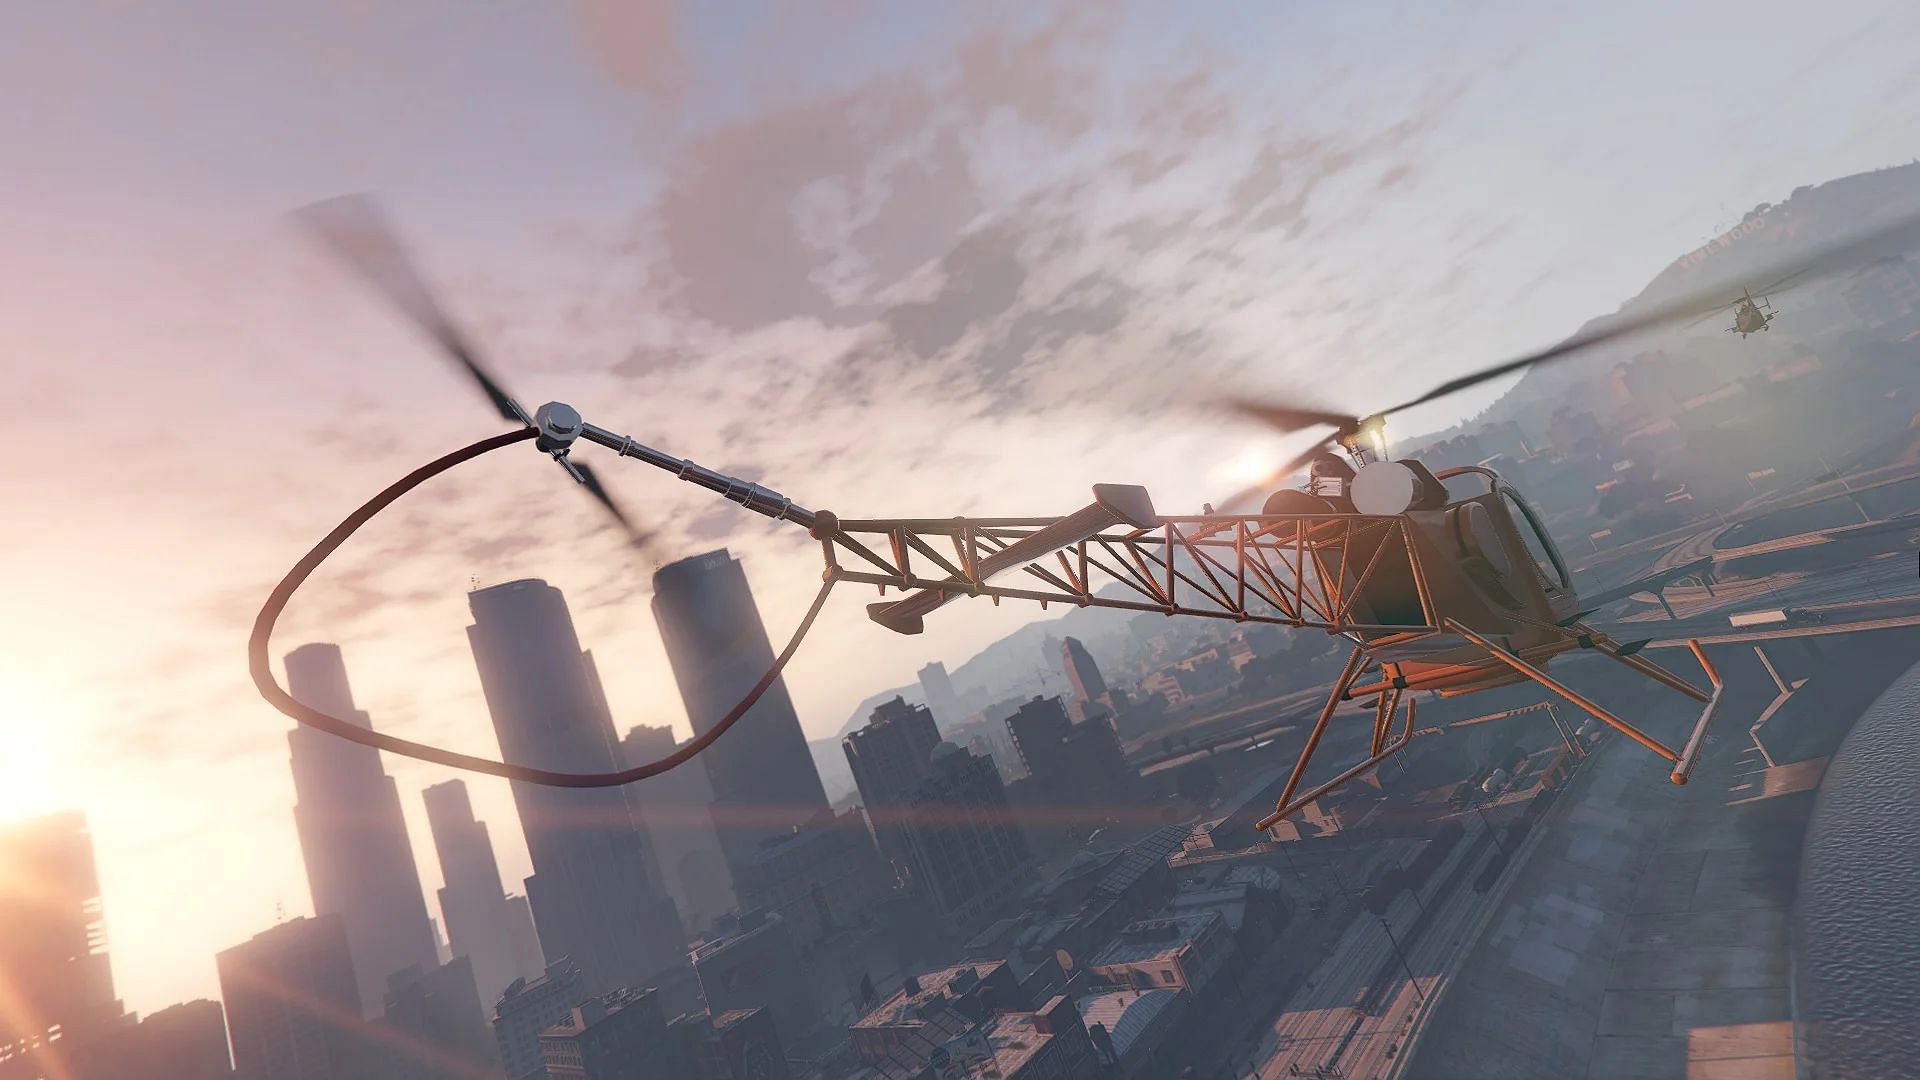 All helicopters operate similarly in GTA 5 (Image via Reddit/Flame_Vixen)